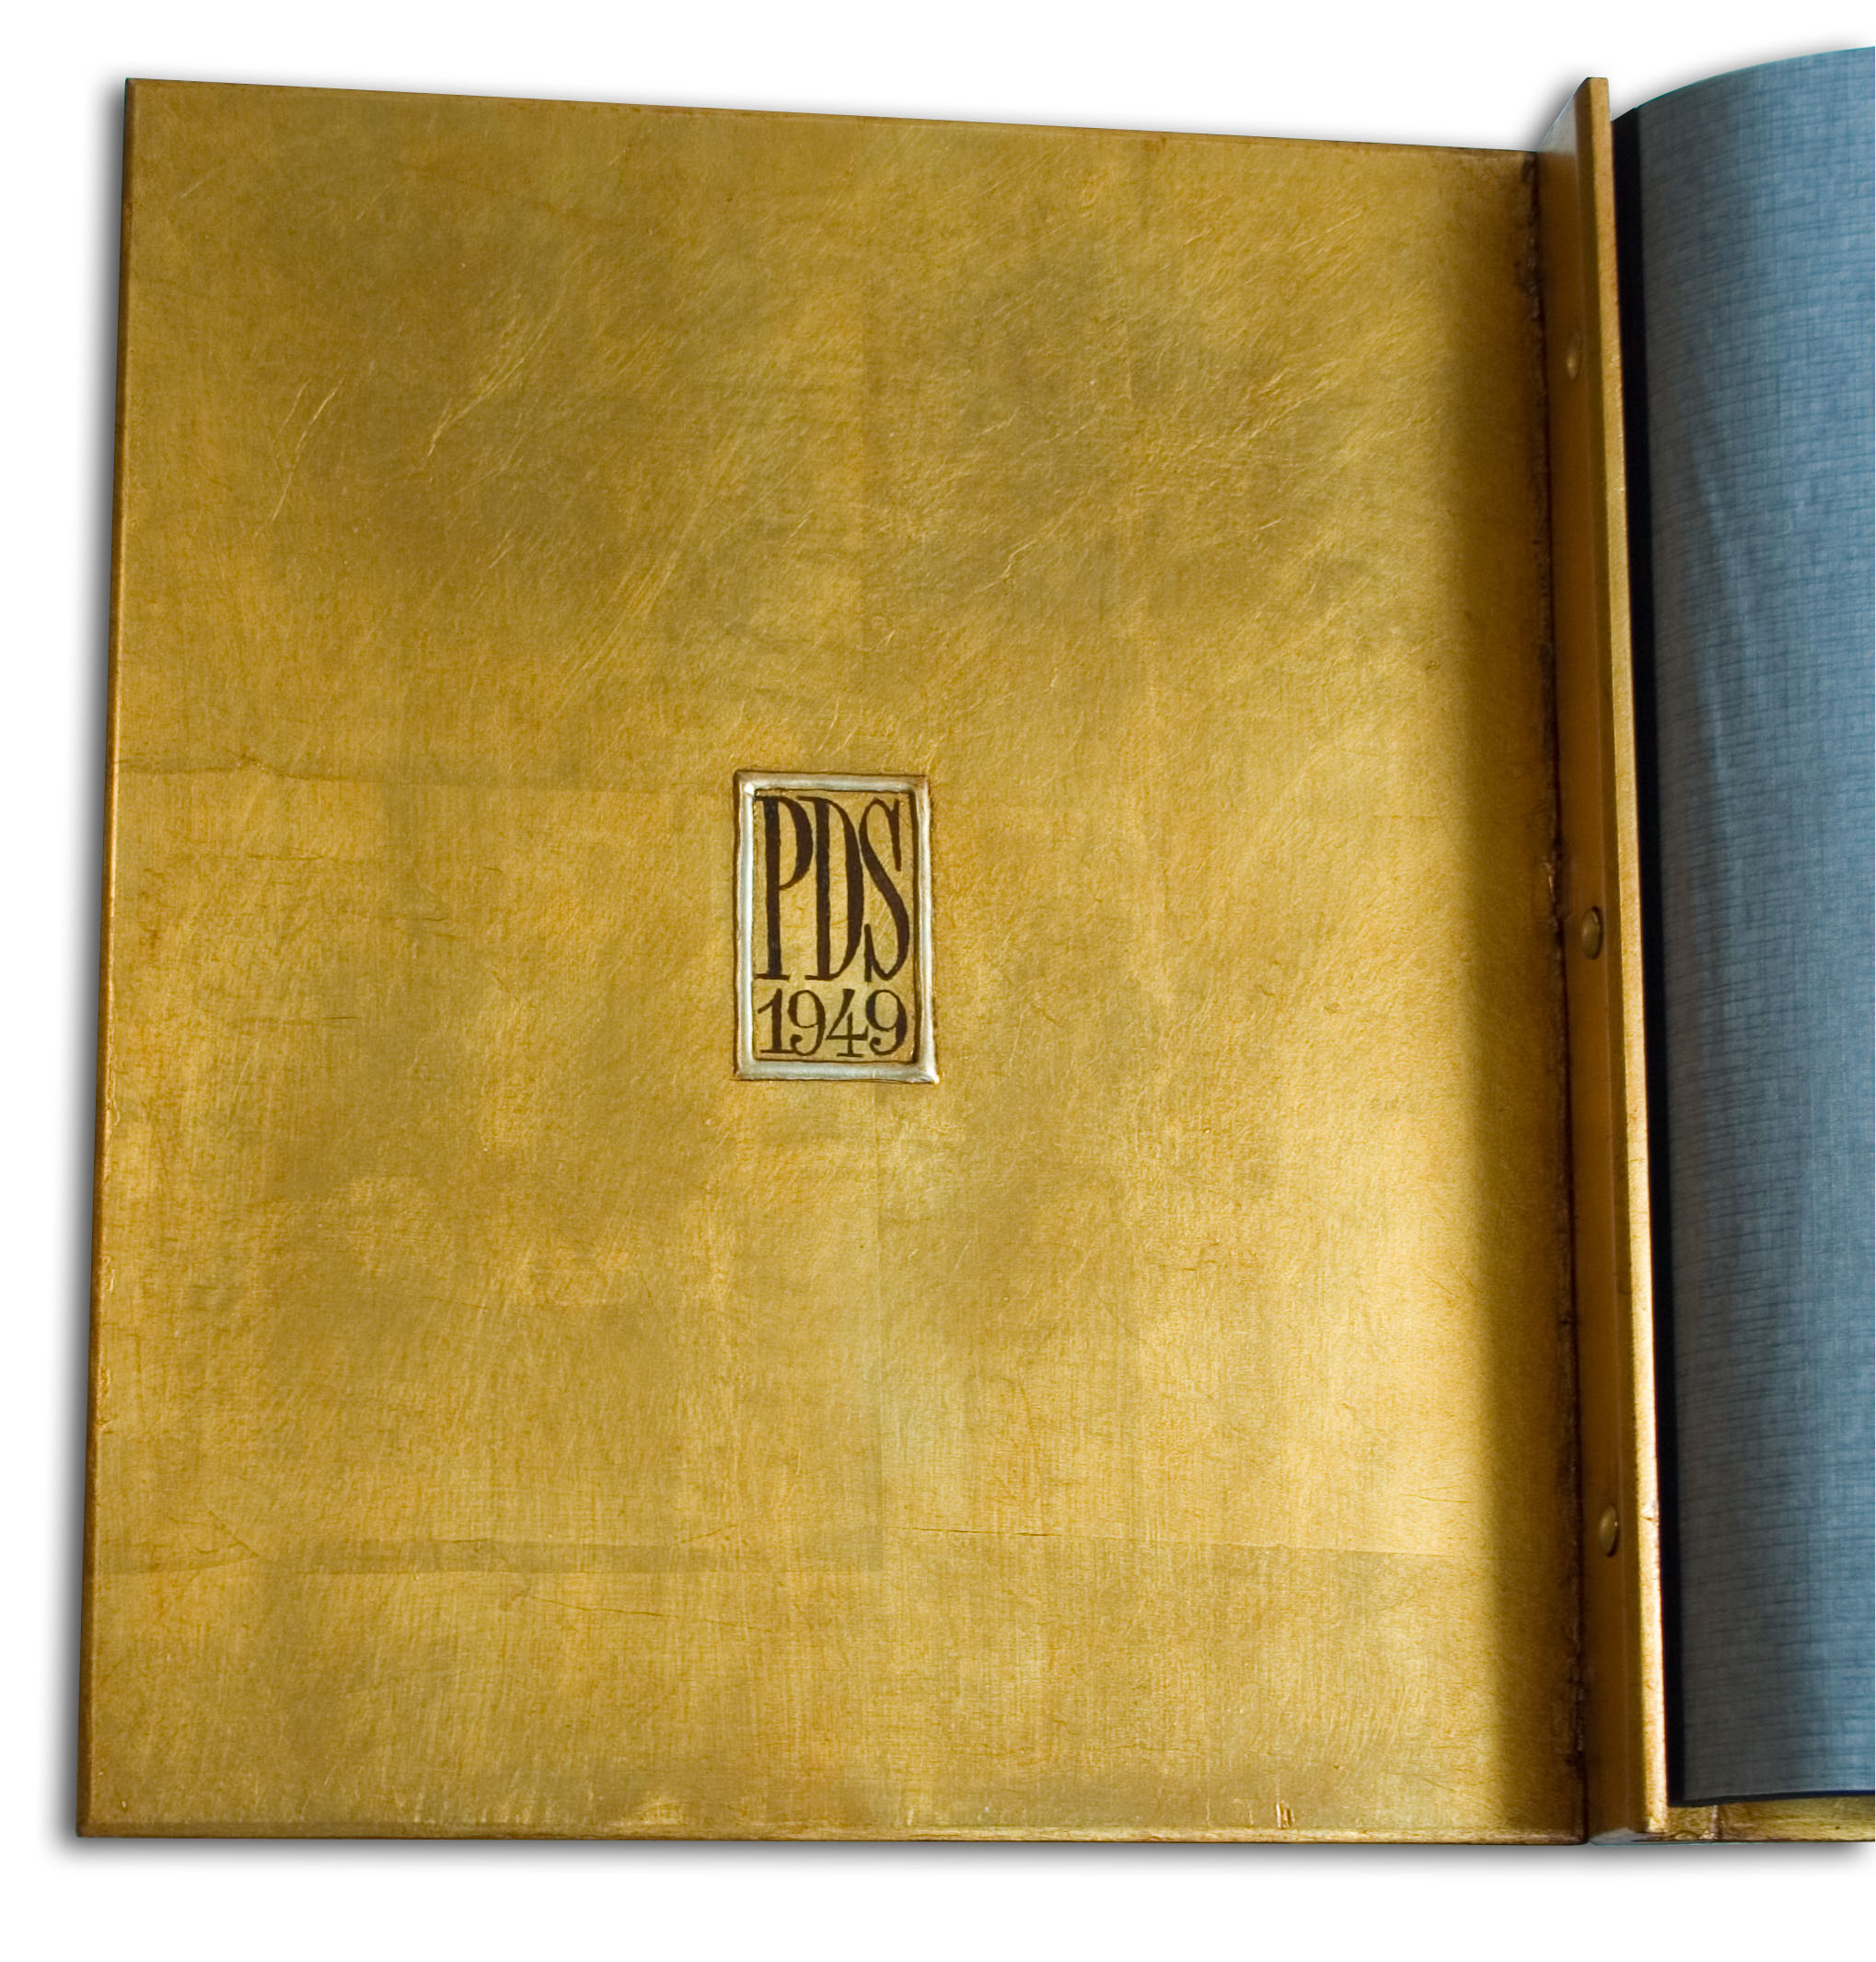 etched monogram on album inside front cover